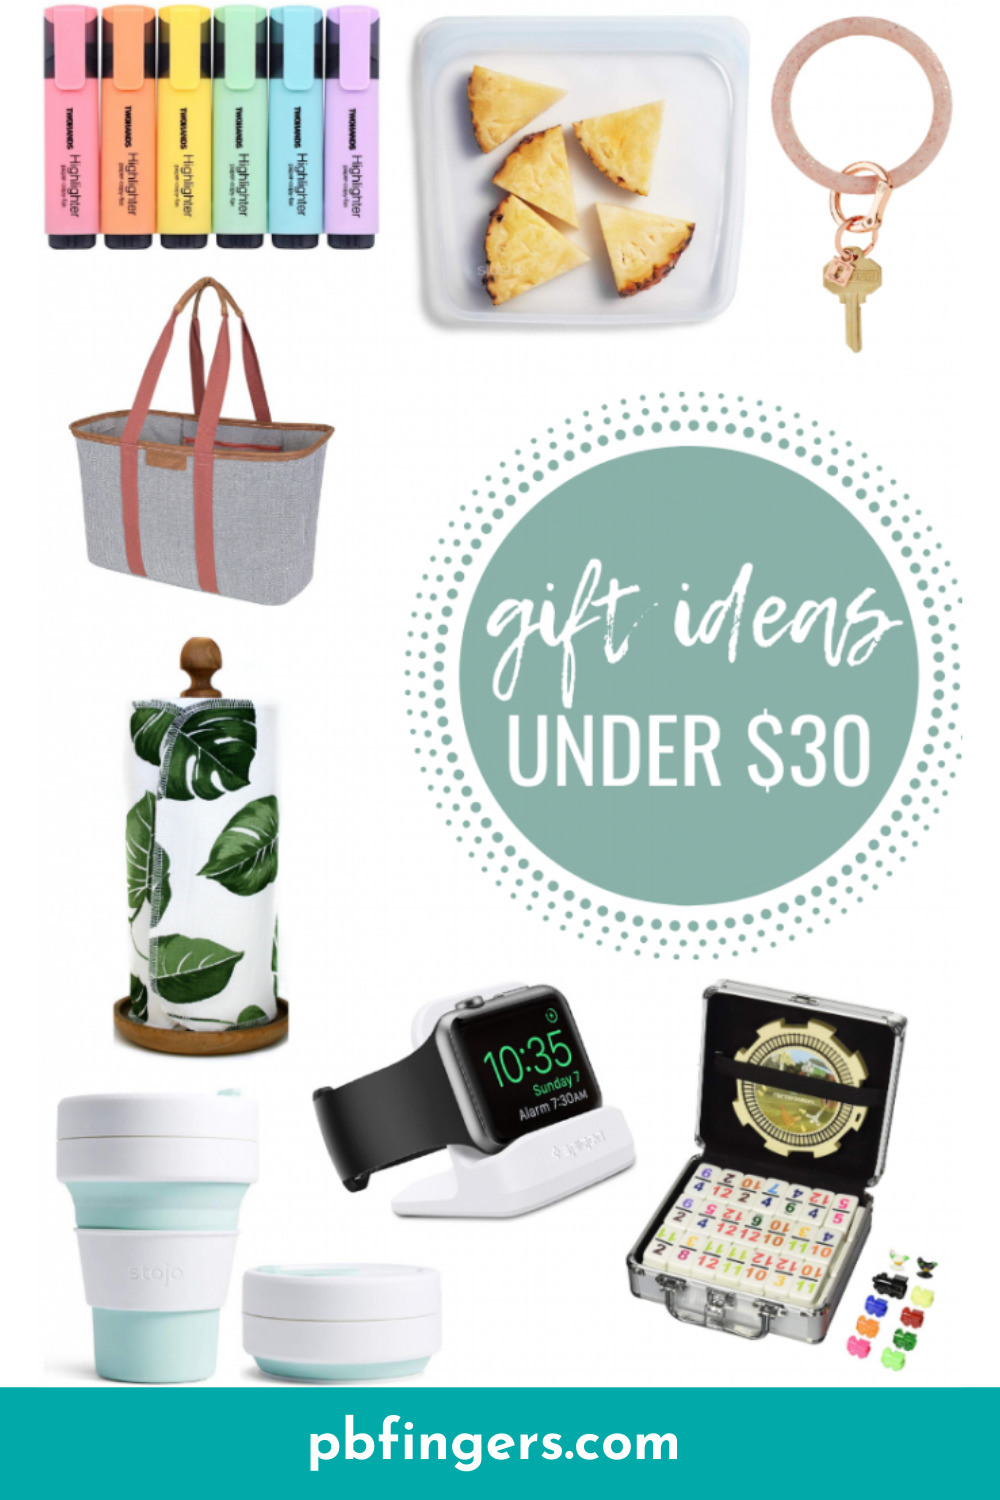 Gifts Under $30 For Anyone On Your List - My Kind of Sweet